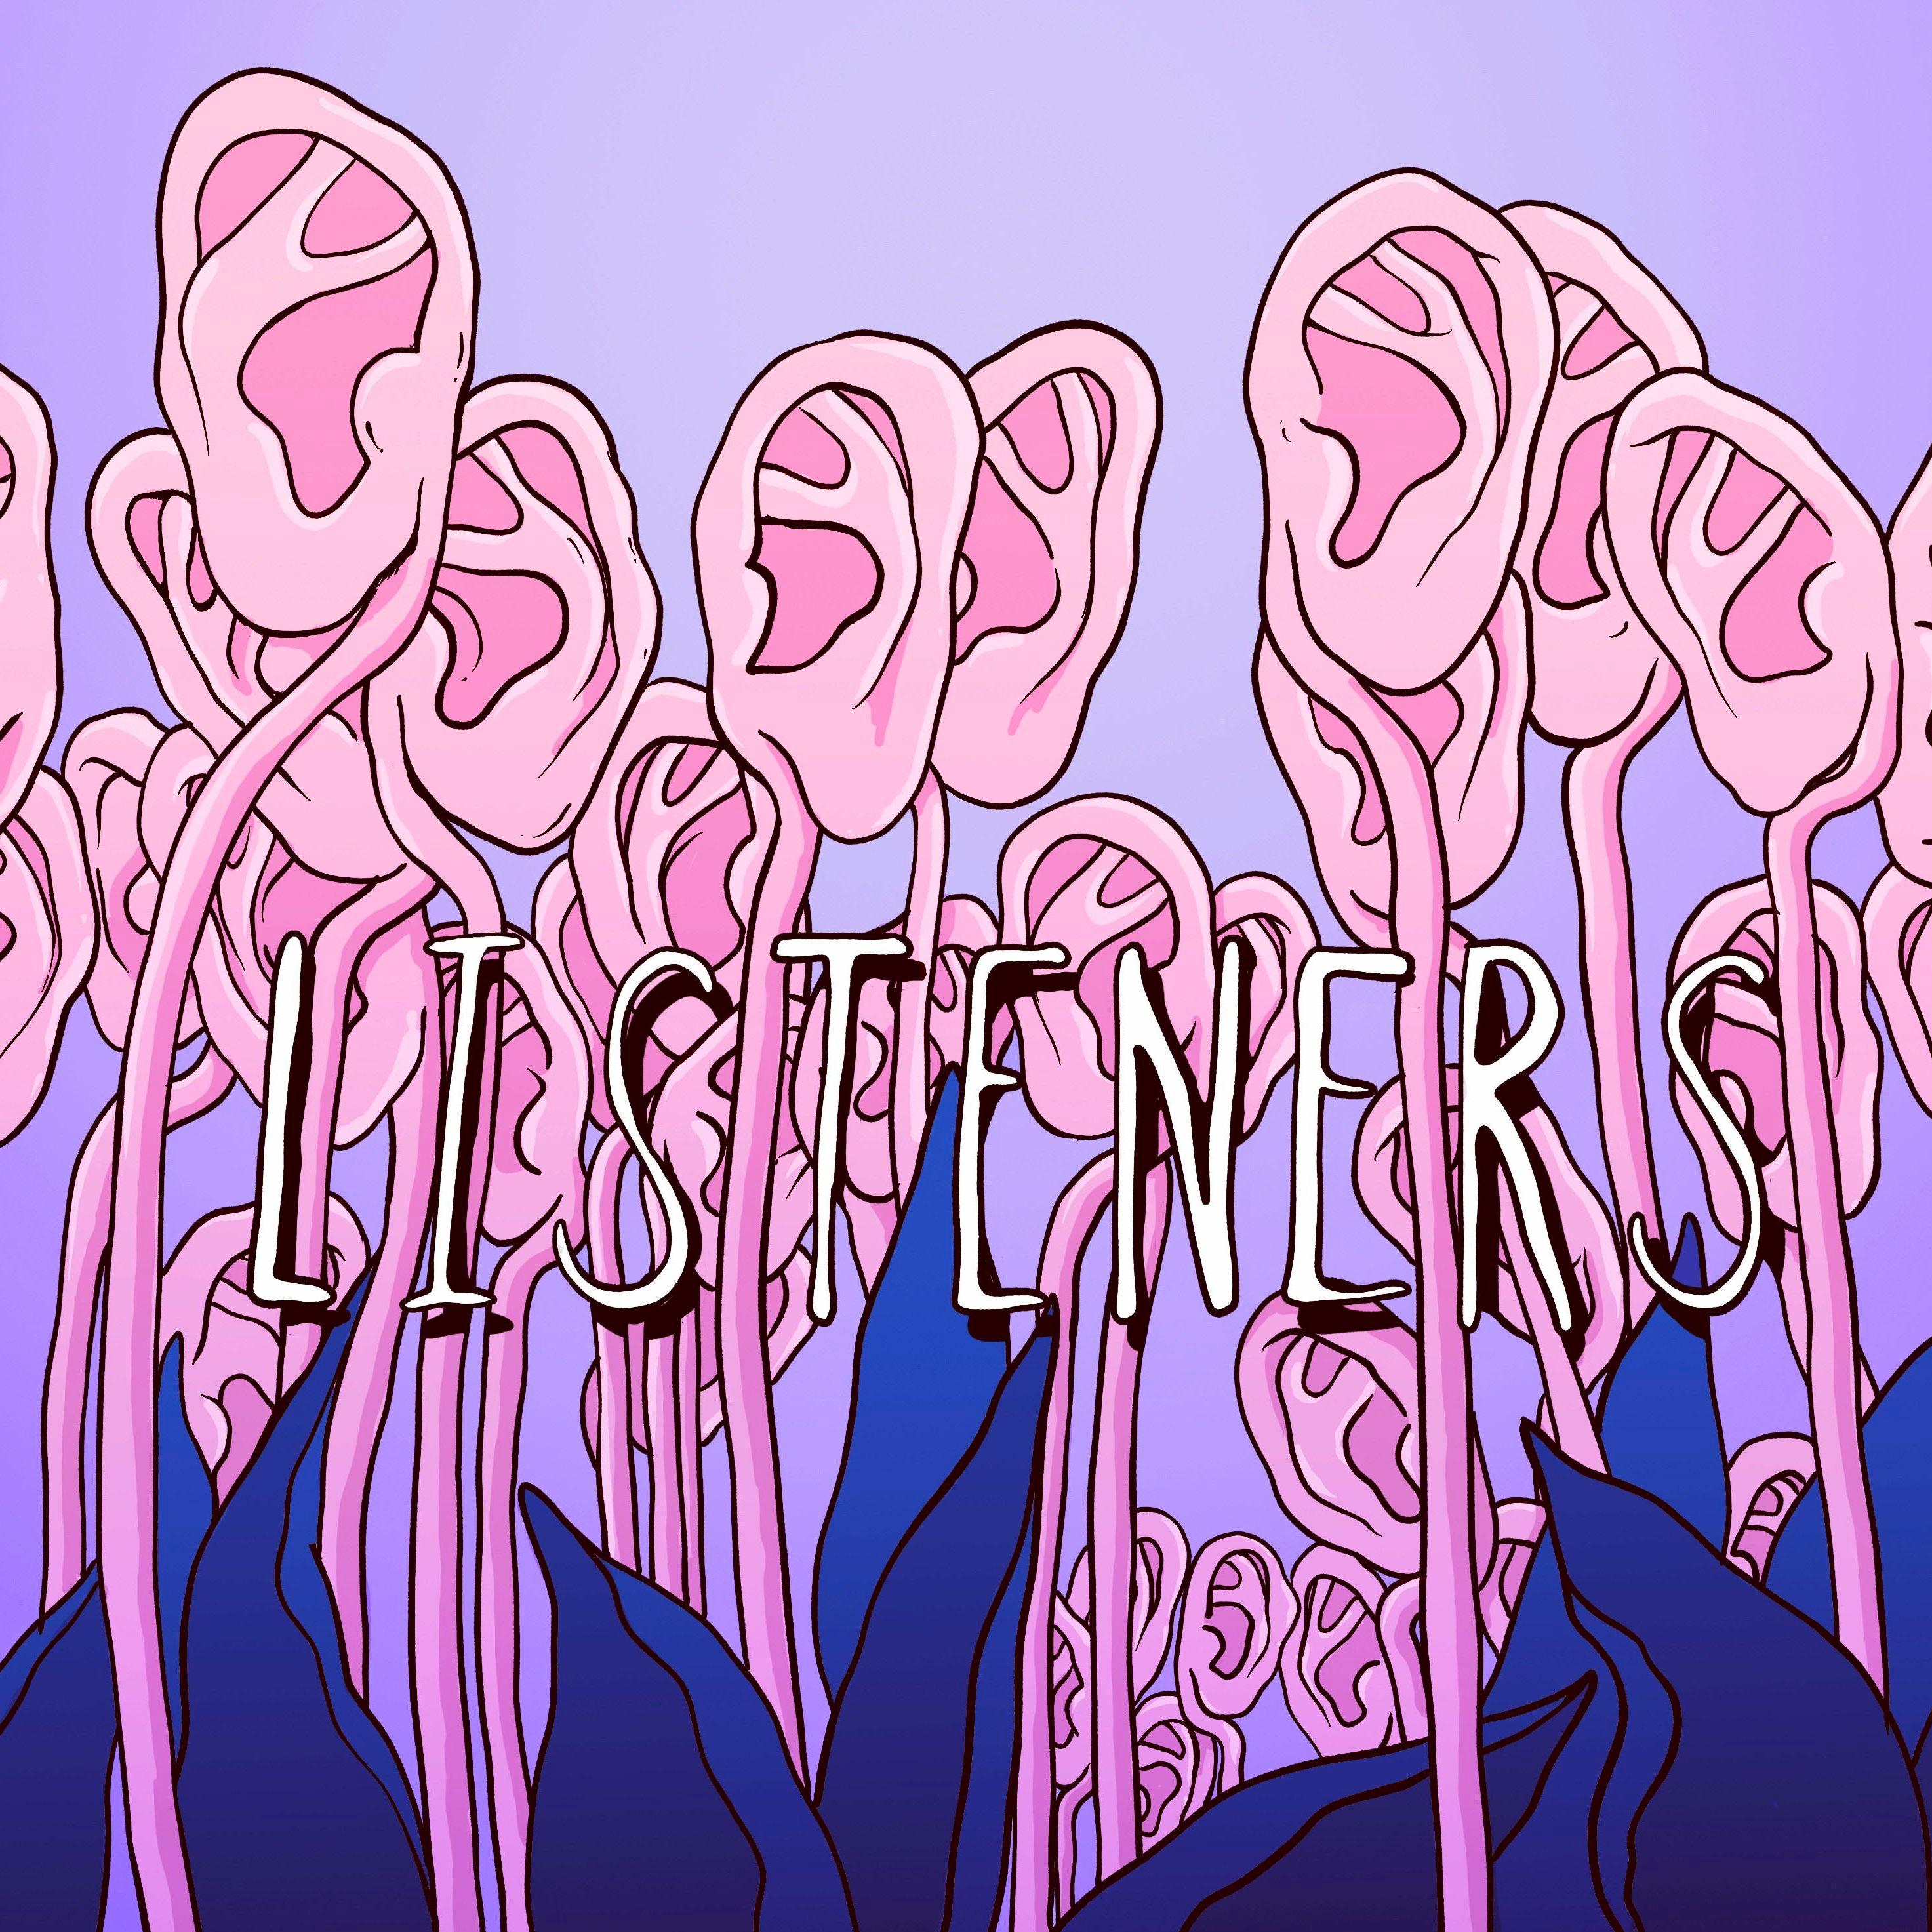 Thumbnail for "190 - Listeners".